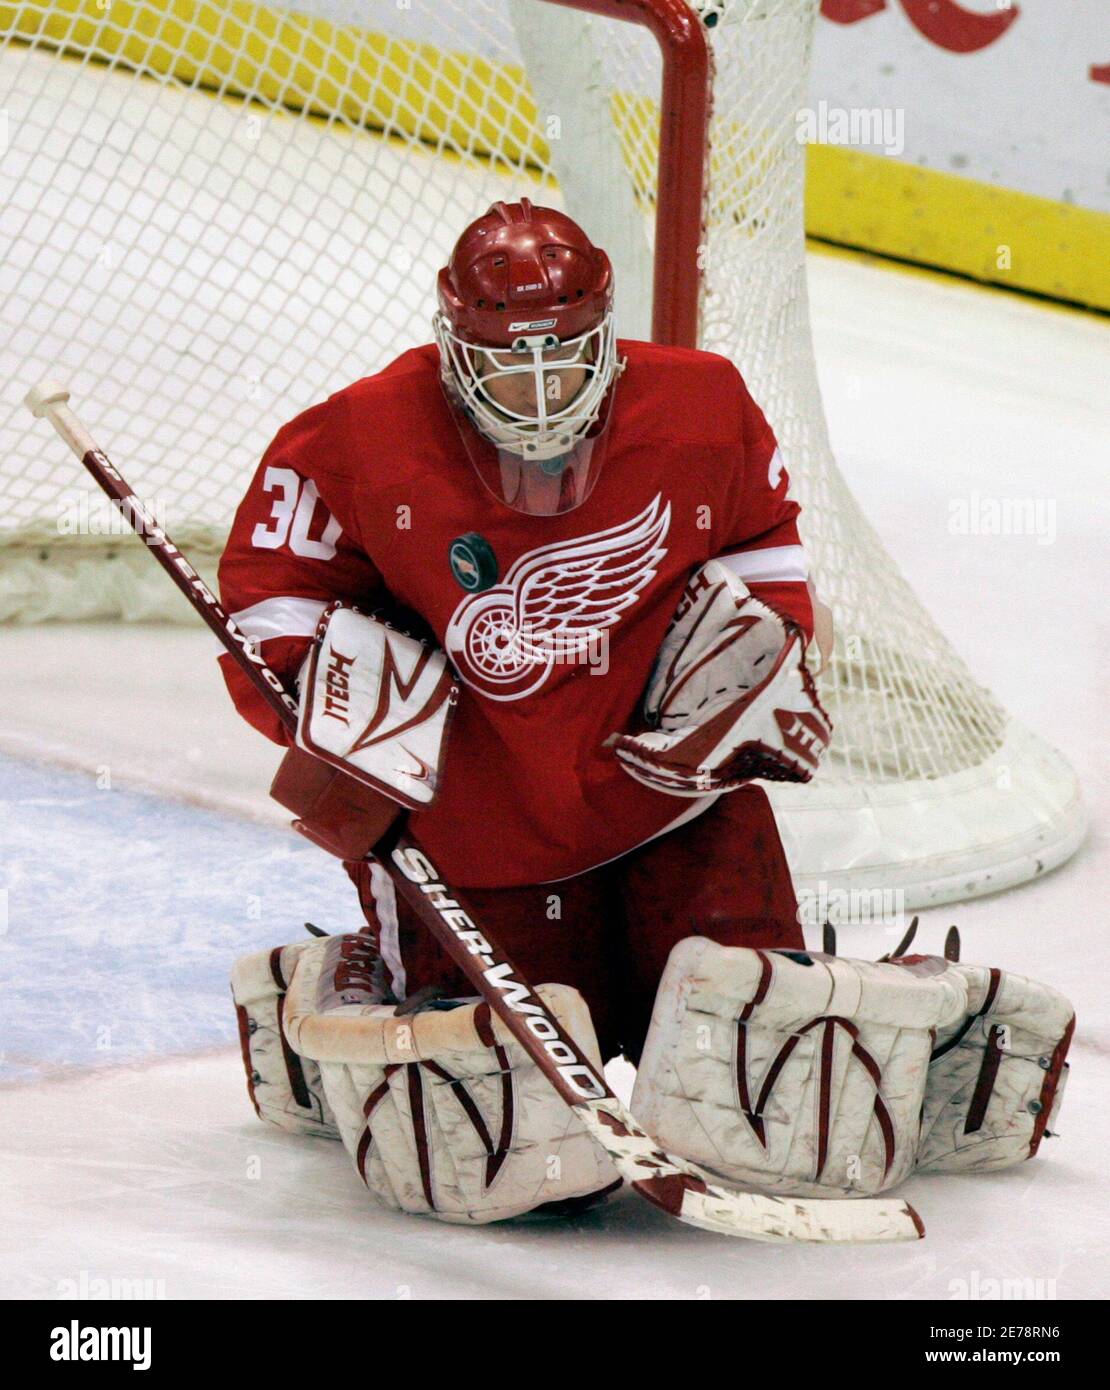 Detroit Red Wings goalie Chris Osgood stops a shot by the Dallas Stars  during the third period of their NHL hockey game in Detroit, Michigan  January 2, 2008. REUTERS/Rebecca Cook (UNITED STATES